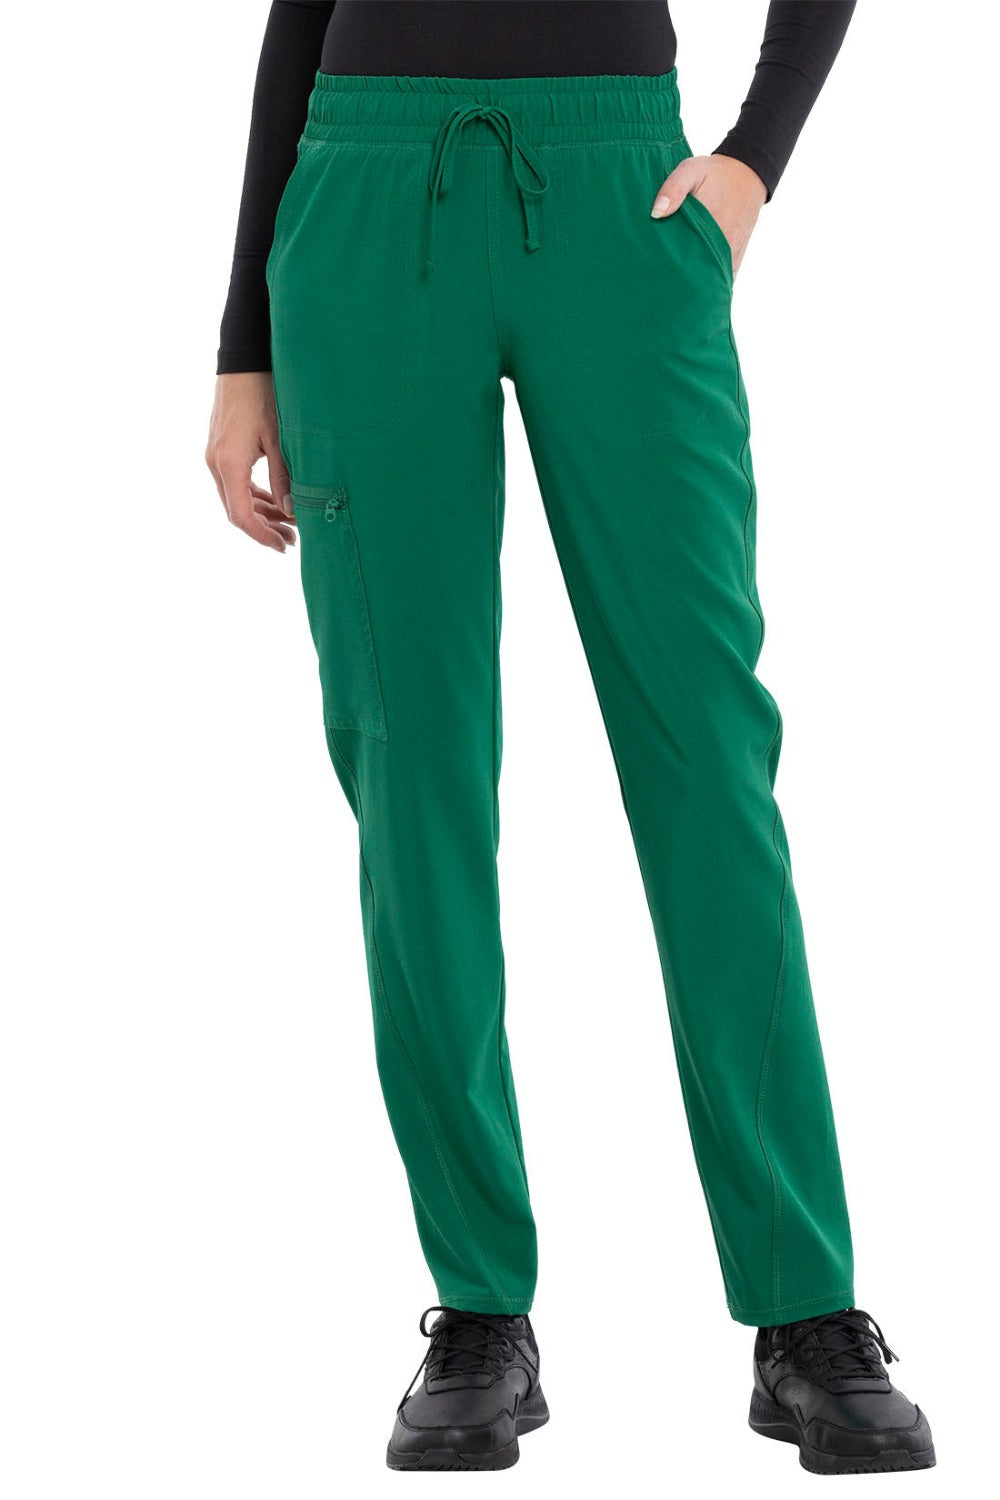 Cherokee Allura Petite Scrub Pant Mid Rise Tapered Leg Drawstring in Hunter at Parker's Clothing and Shoes.